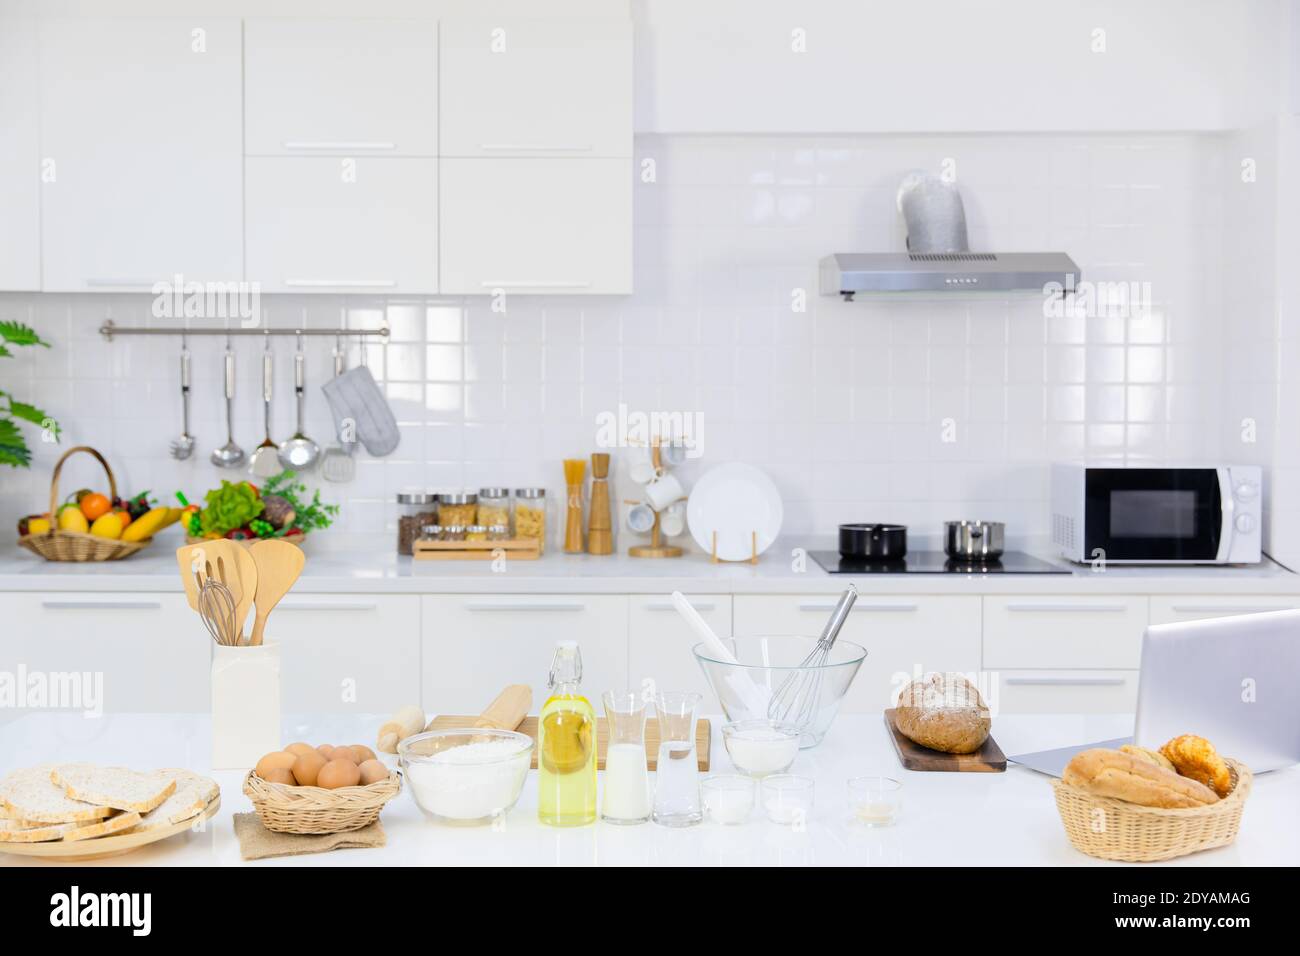 clean new modern kitchen interior with homemade bread decoration on the table top for background Stock Photo